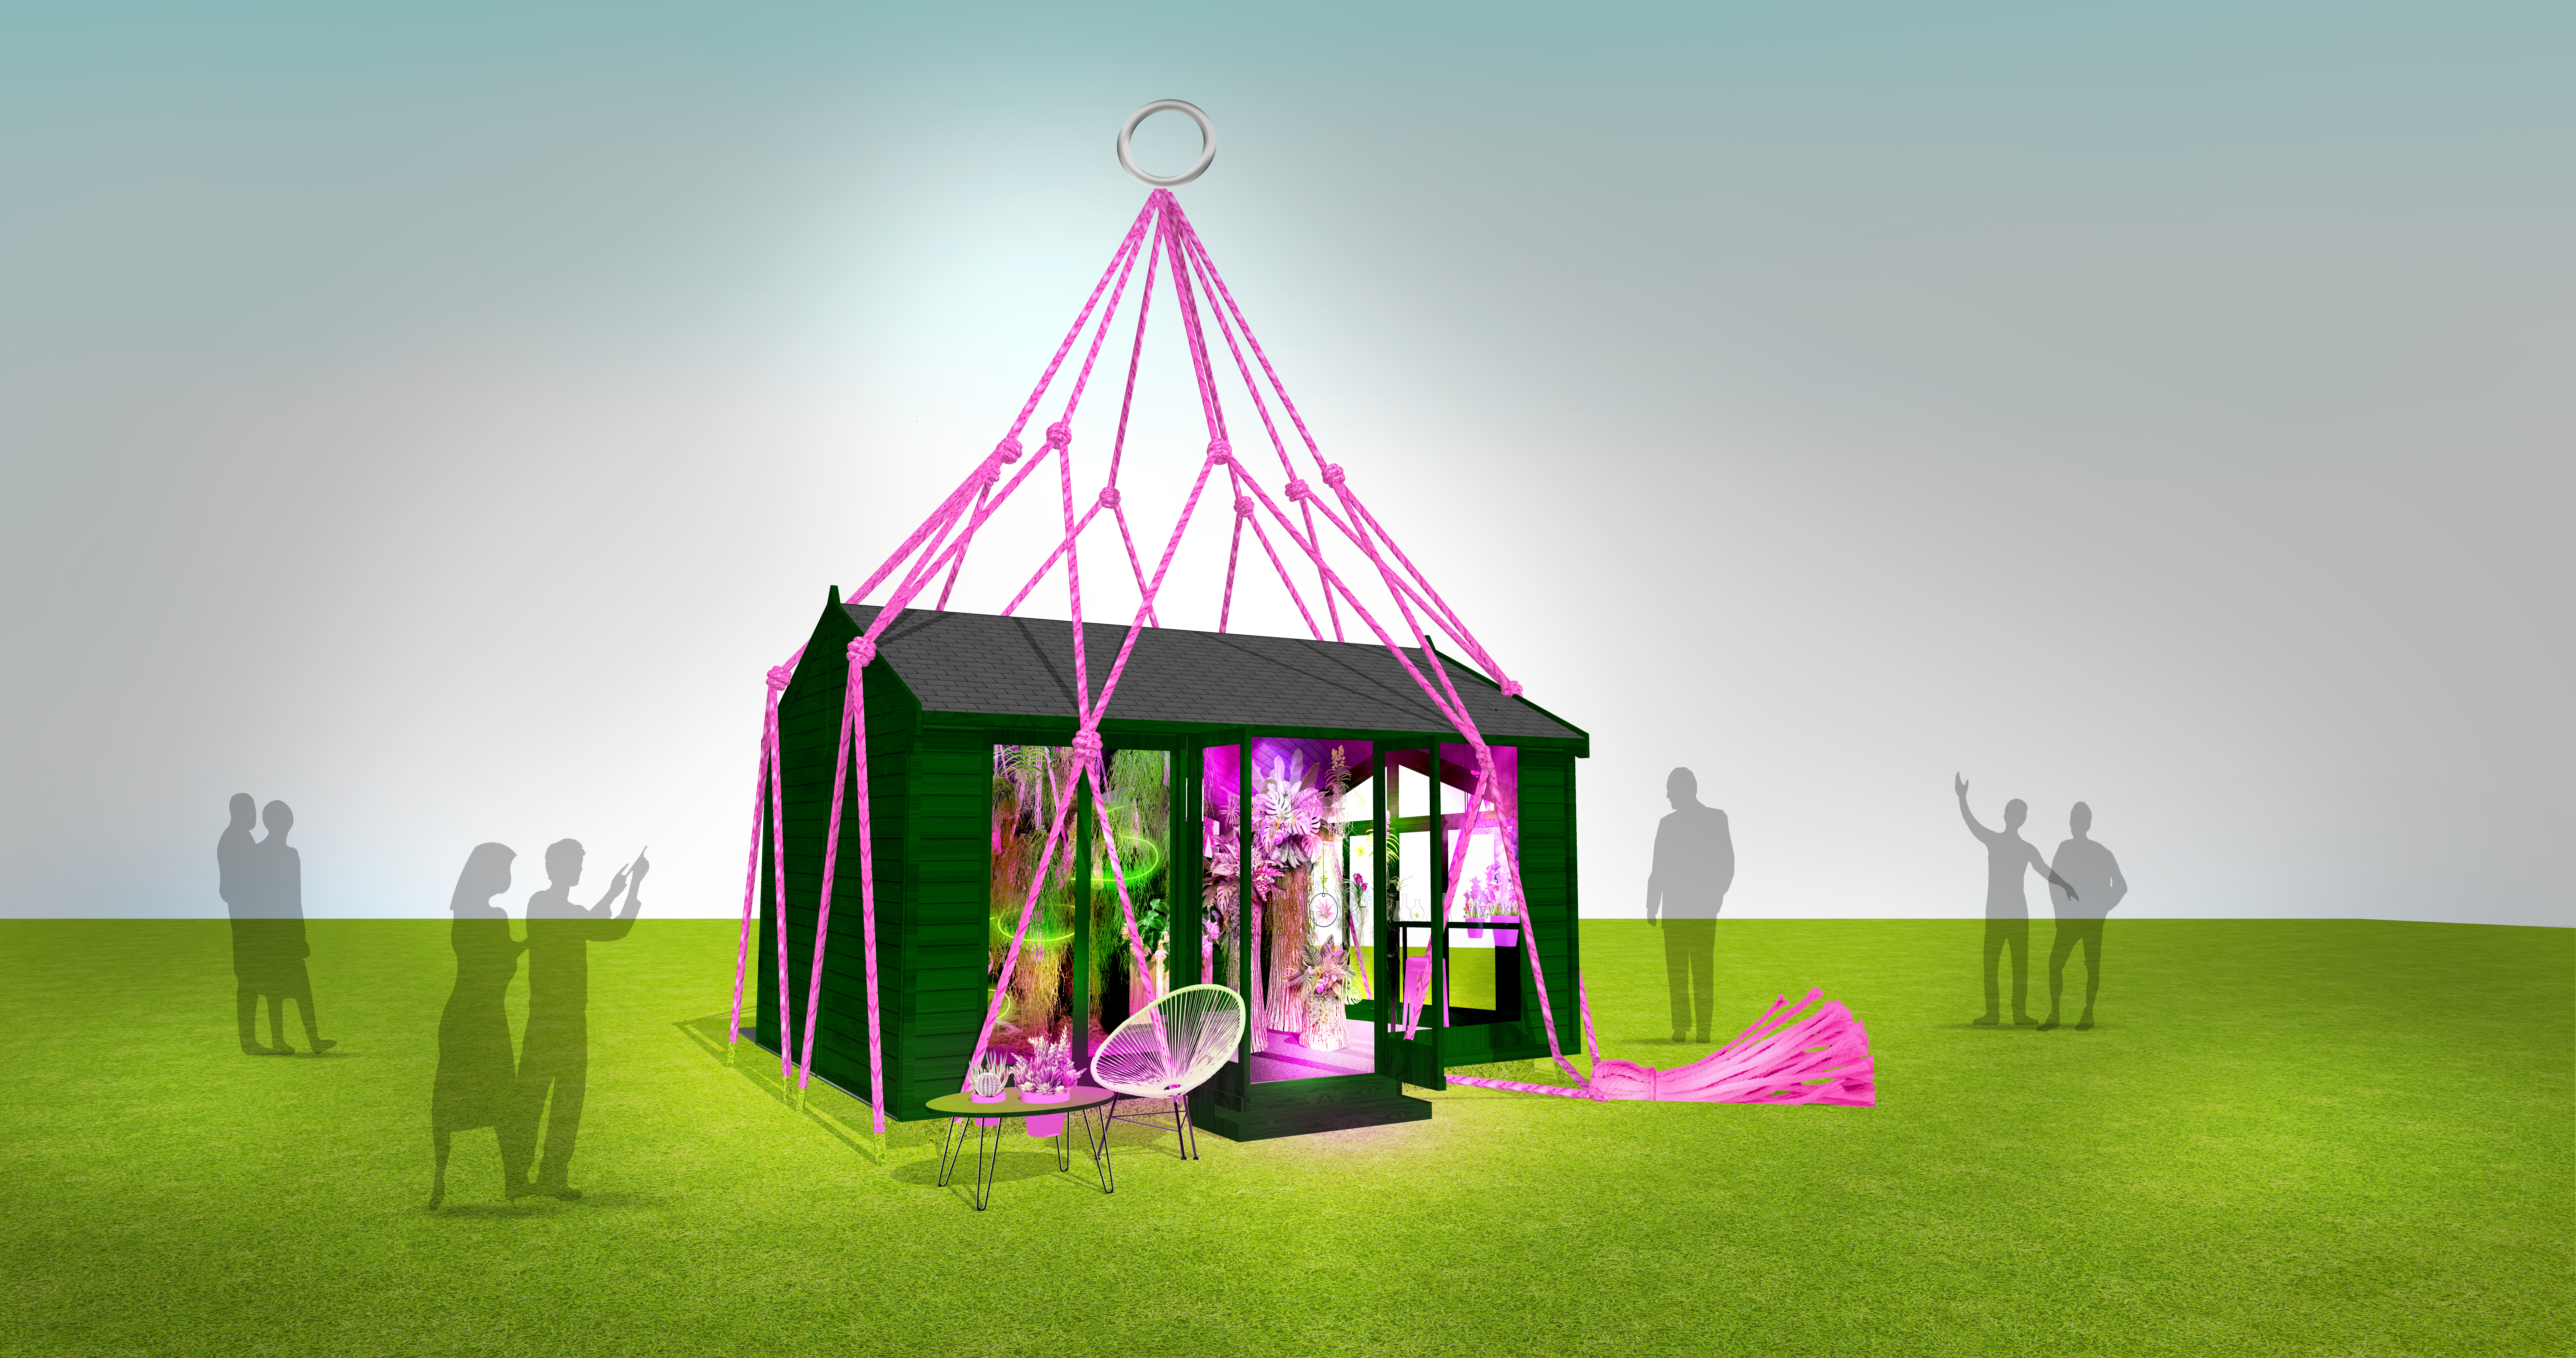 The Green Room Suspended in Pink Rope